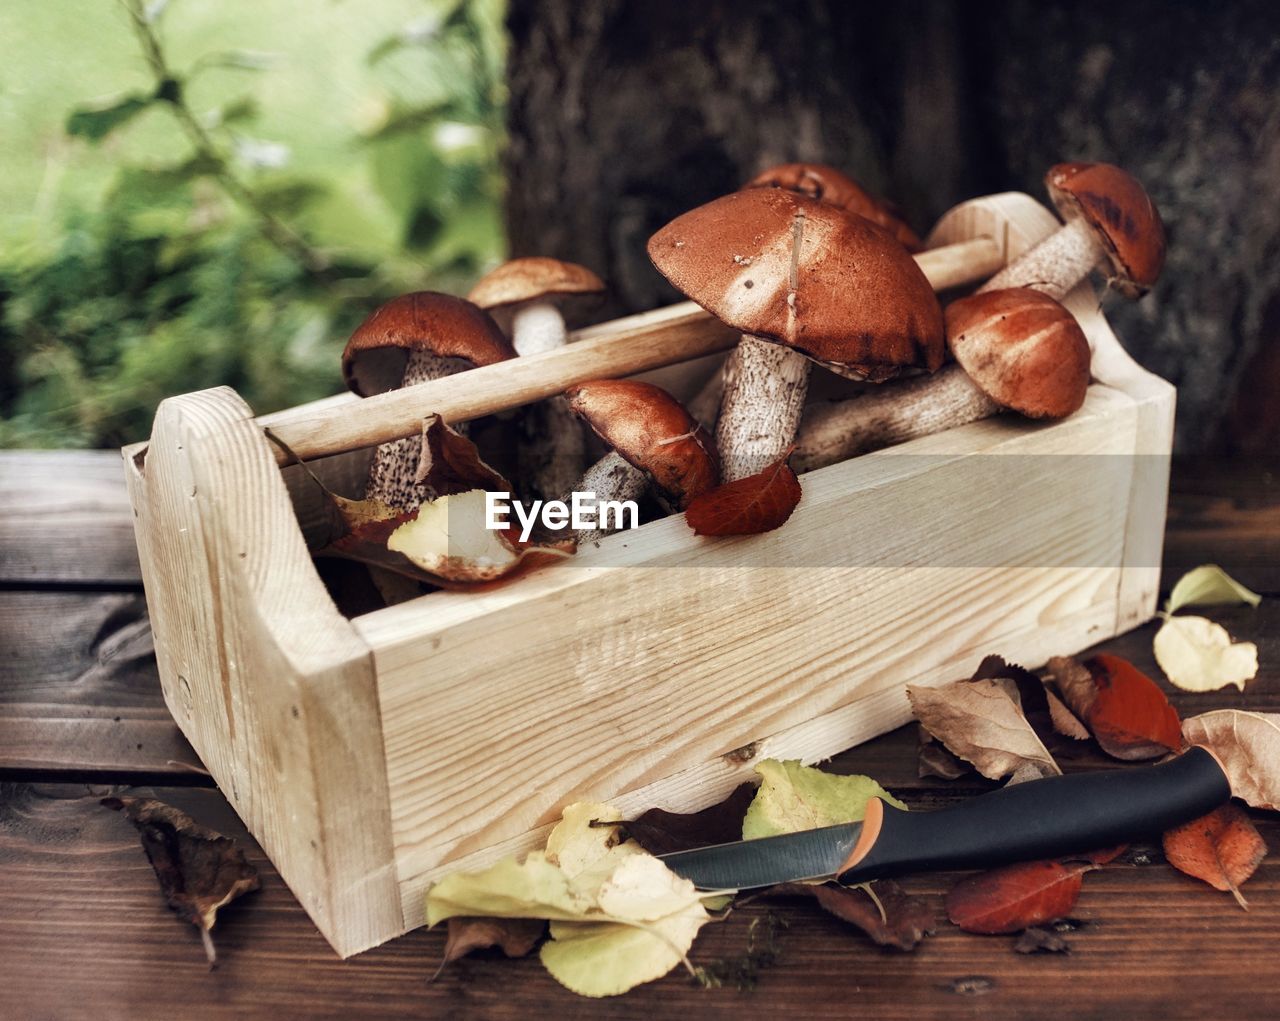 CLOSE-UP OF MUSHROOMS IN WOODEN TABLE